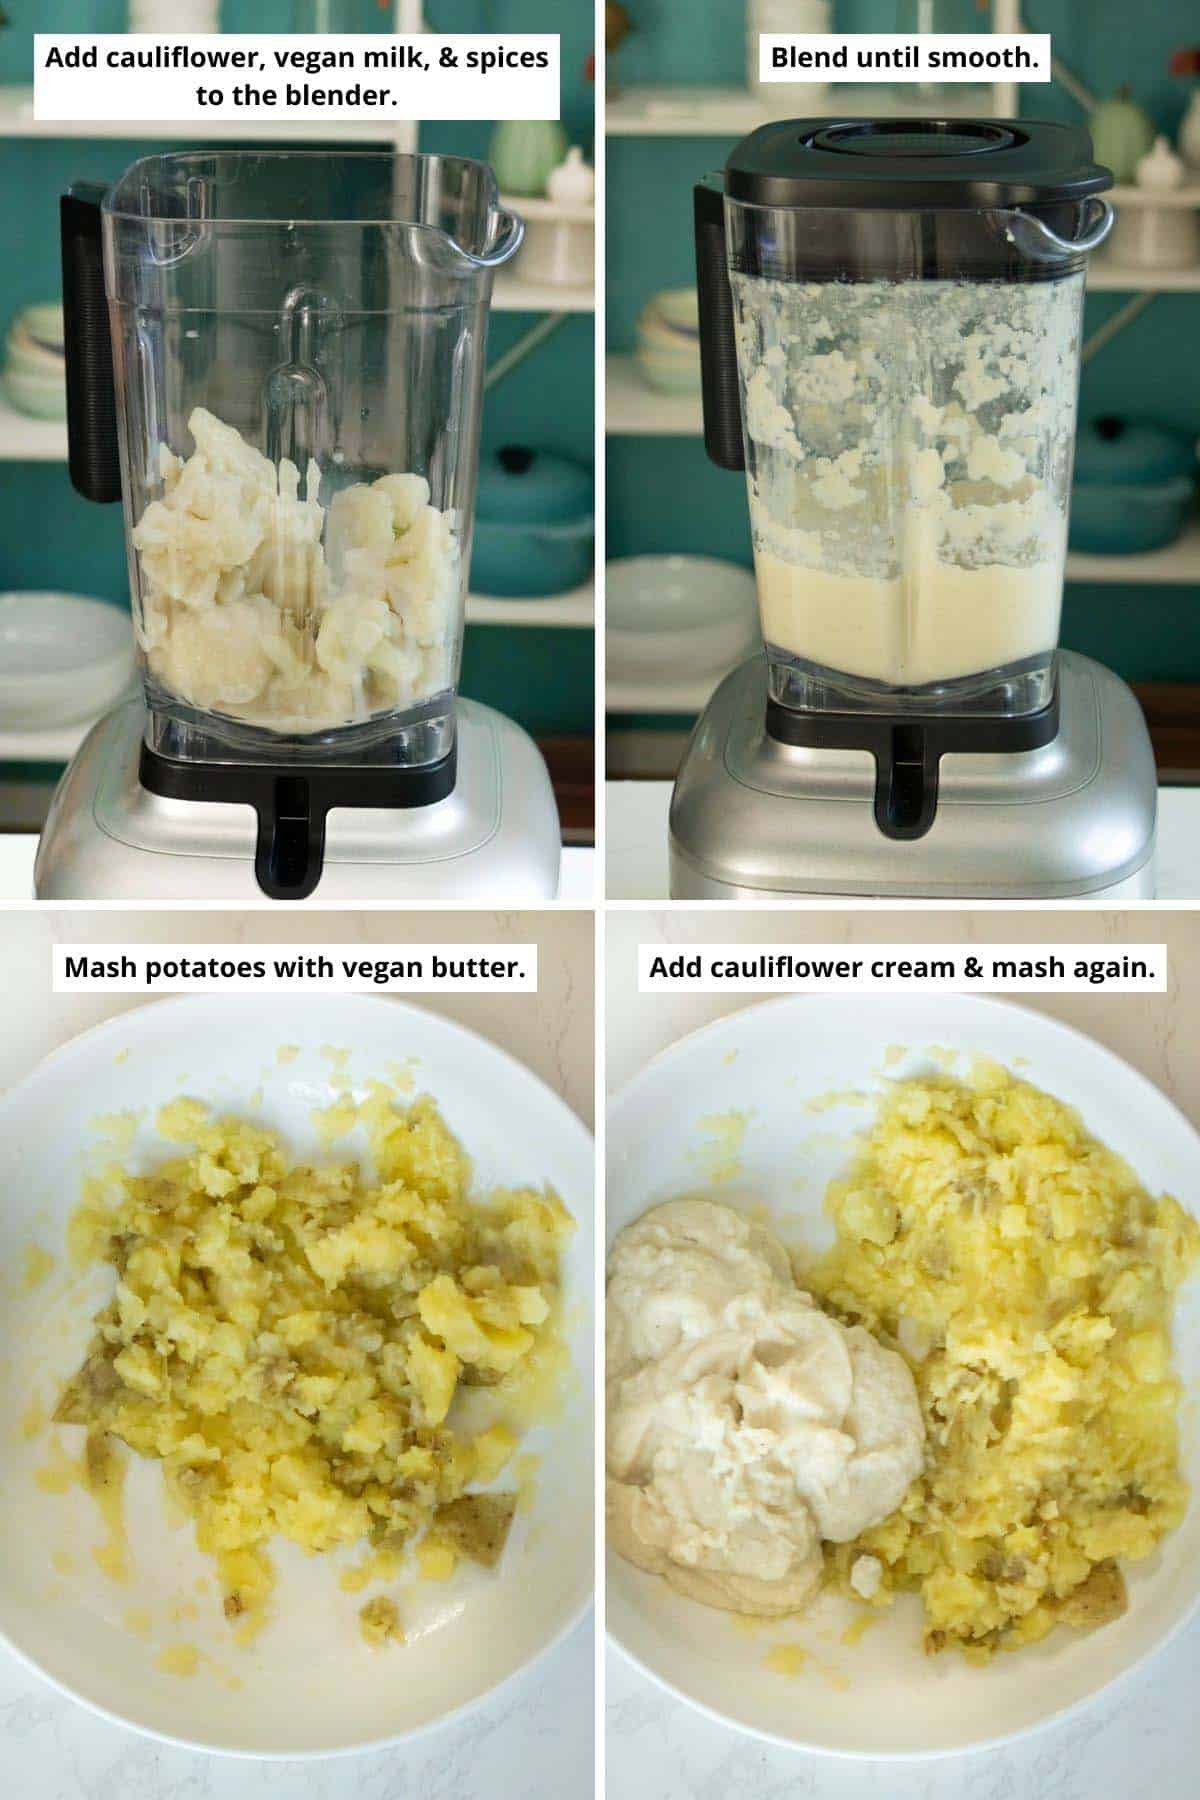 image collage showing cauliflower cream ingredients in the blender before and after blending, potatoes mashed with vegan butter and adding cauliflower cream to the bowl